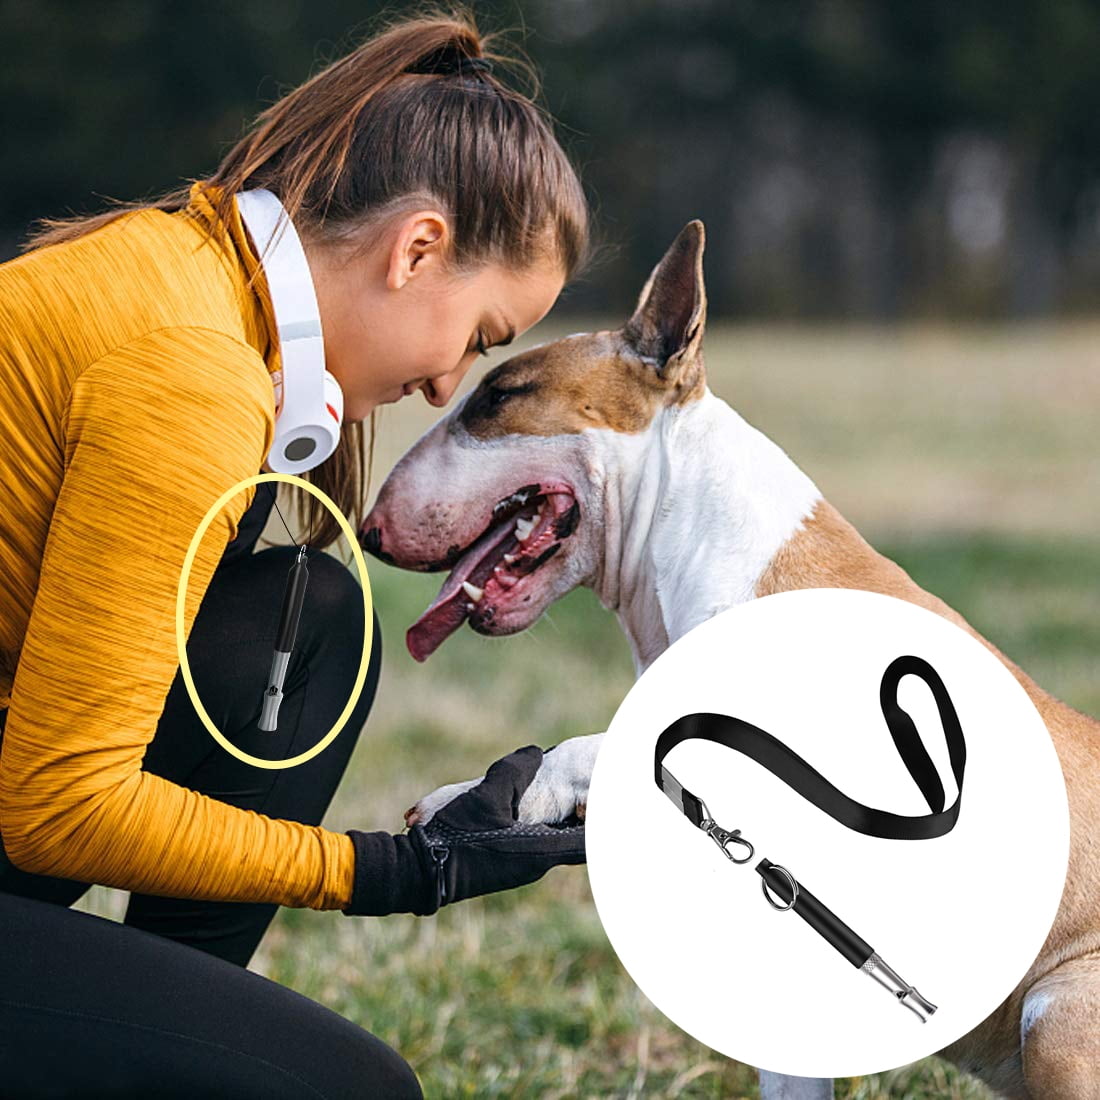 Train Your Dog Silver Training Deterrent Devices Ultrasonic Patrol Sound Repellent Repeller Ortz Dog Whistle to Stop Barking - Free Lanydard Strap Silent Bark Control for Dogs